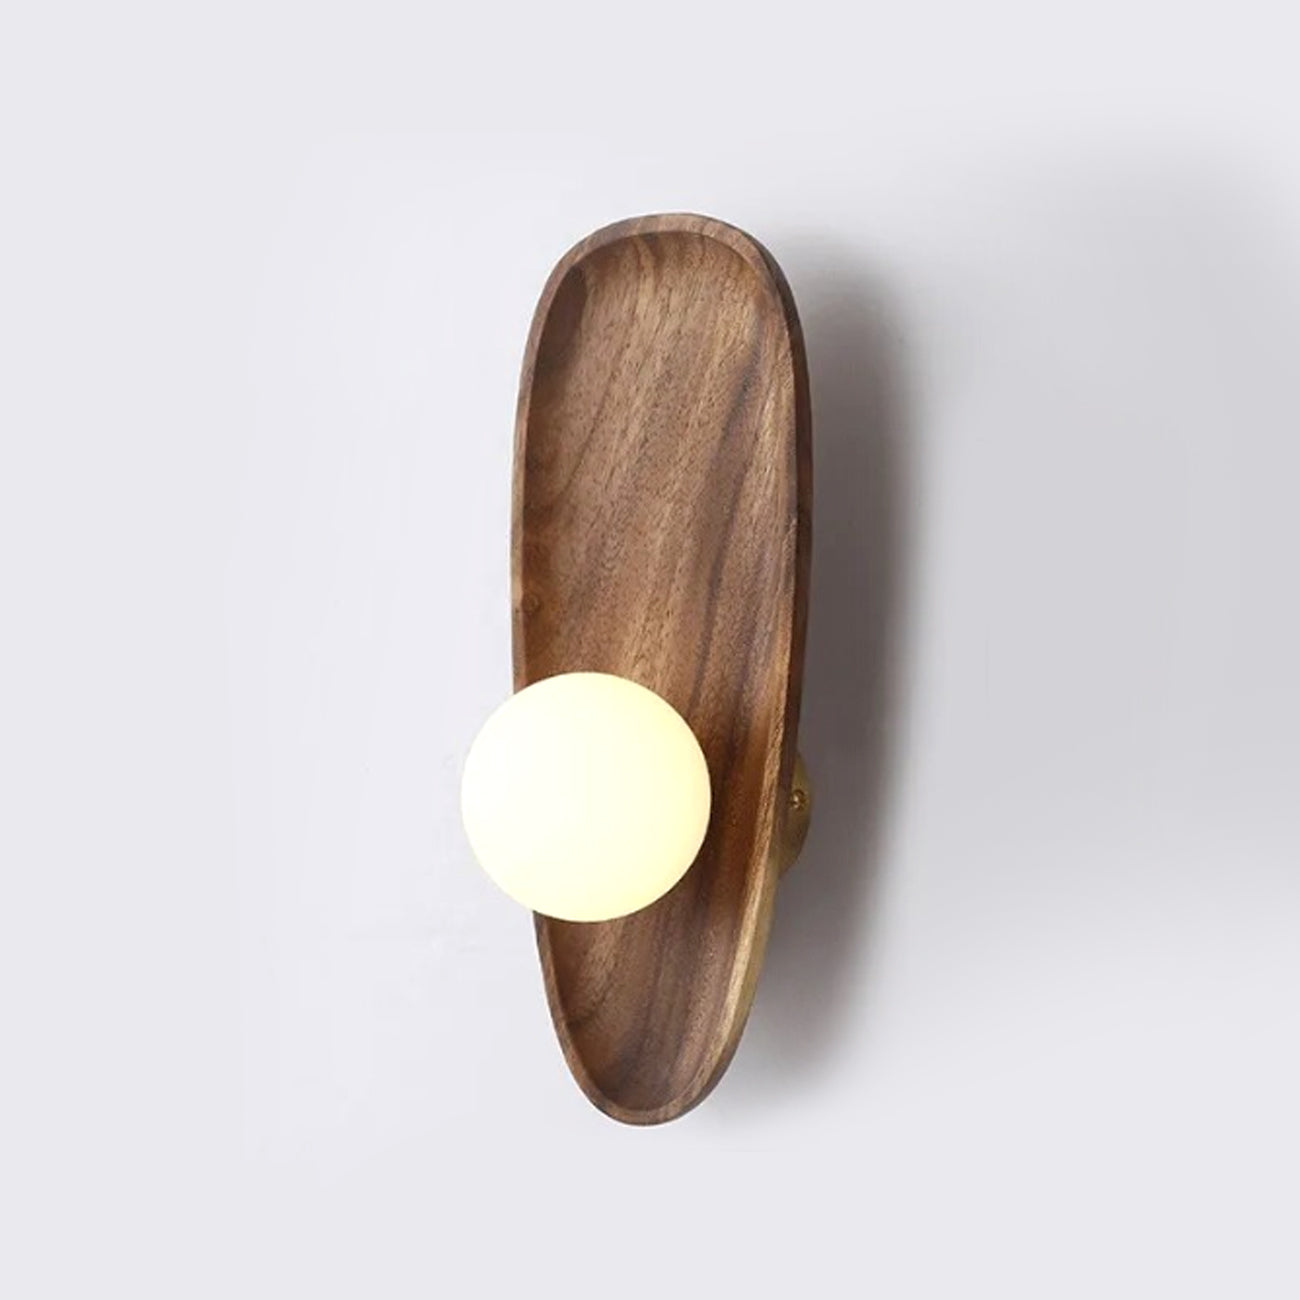 Japanese Style Solid Wooden Plate Wall Fixture Lamp